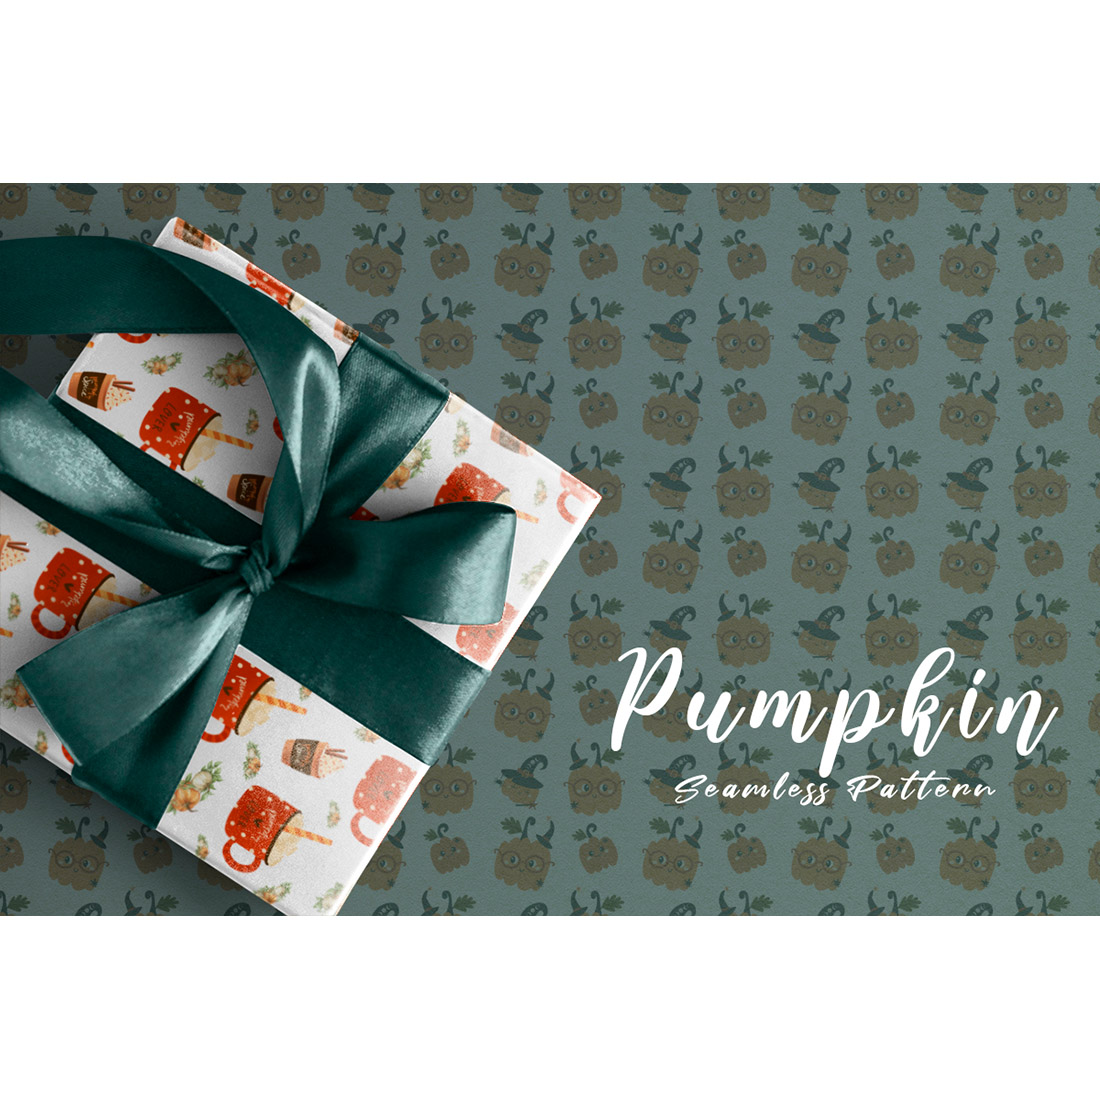 Image of wrapping paper with elegant patterns with pumpkin